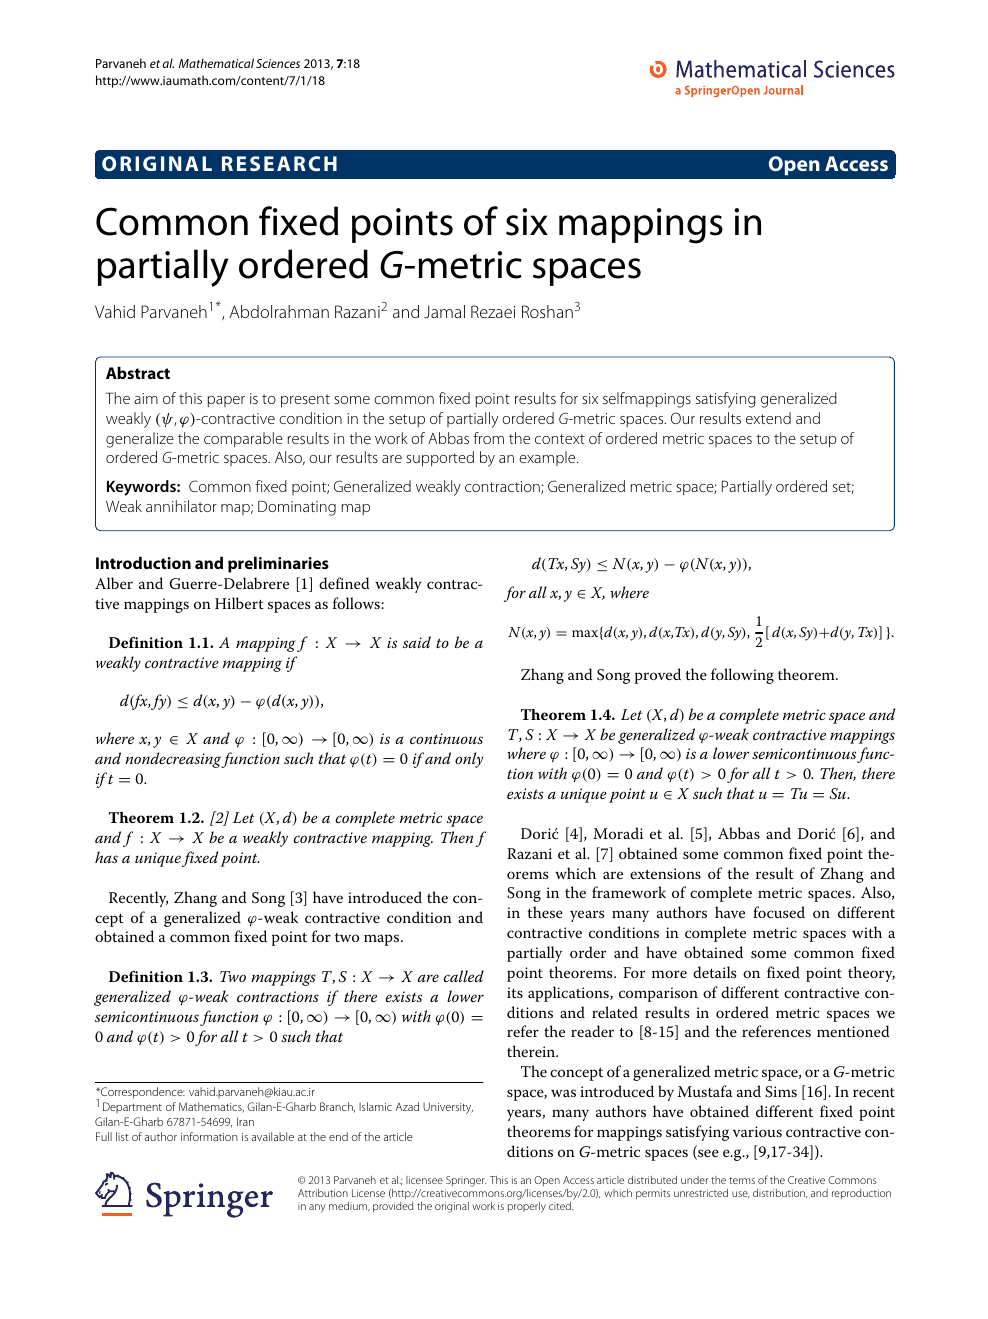 Common Fixed Points Of Six Mappings In Partially Ordered G Metric Spaces Topic Of Research Paper In Mathematics Download Scholarly Article Pdf And Read For Free On Cyberleninka Open Science Hub